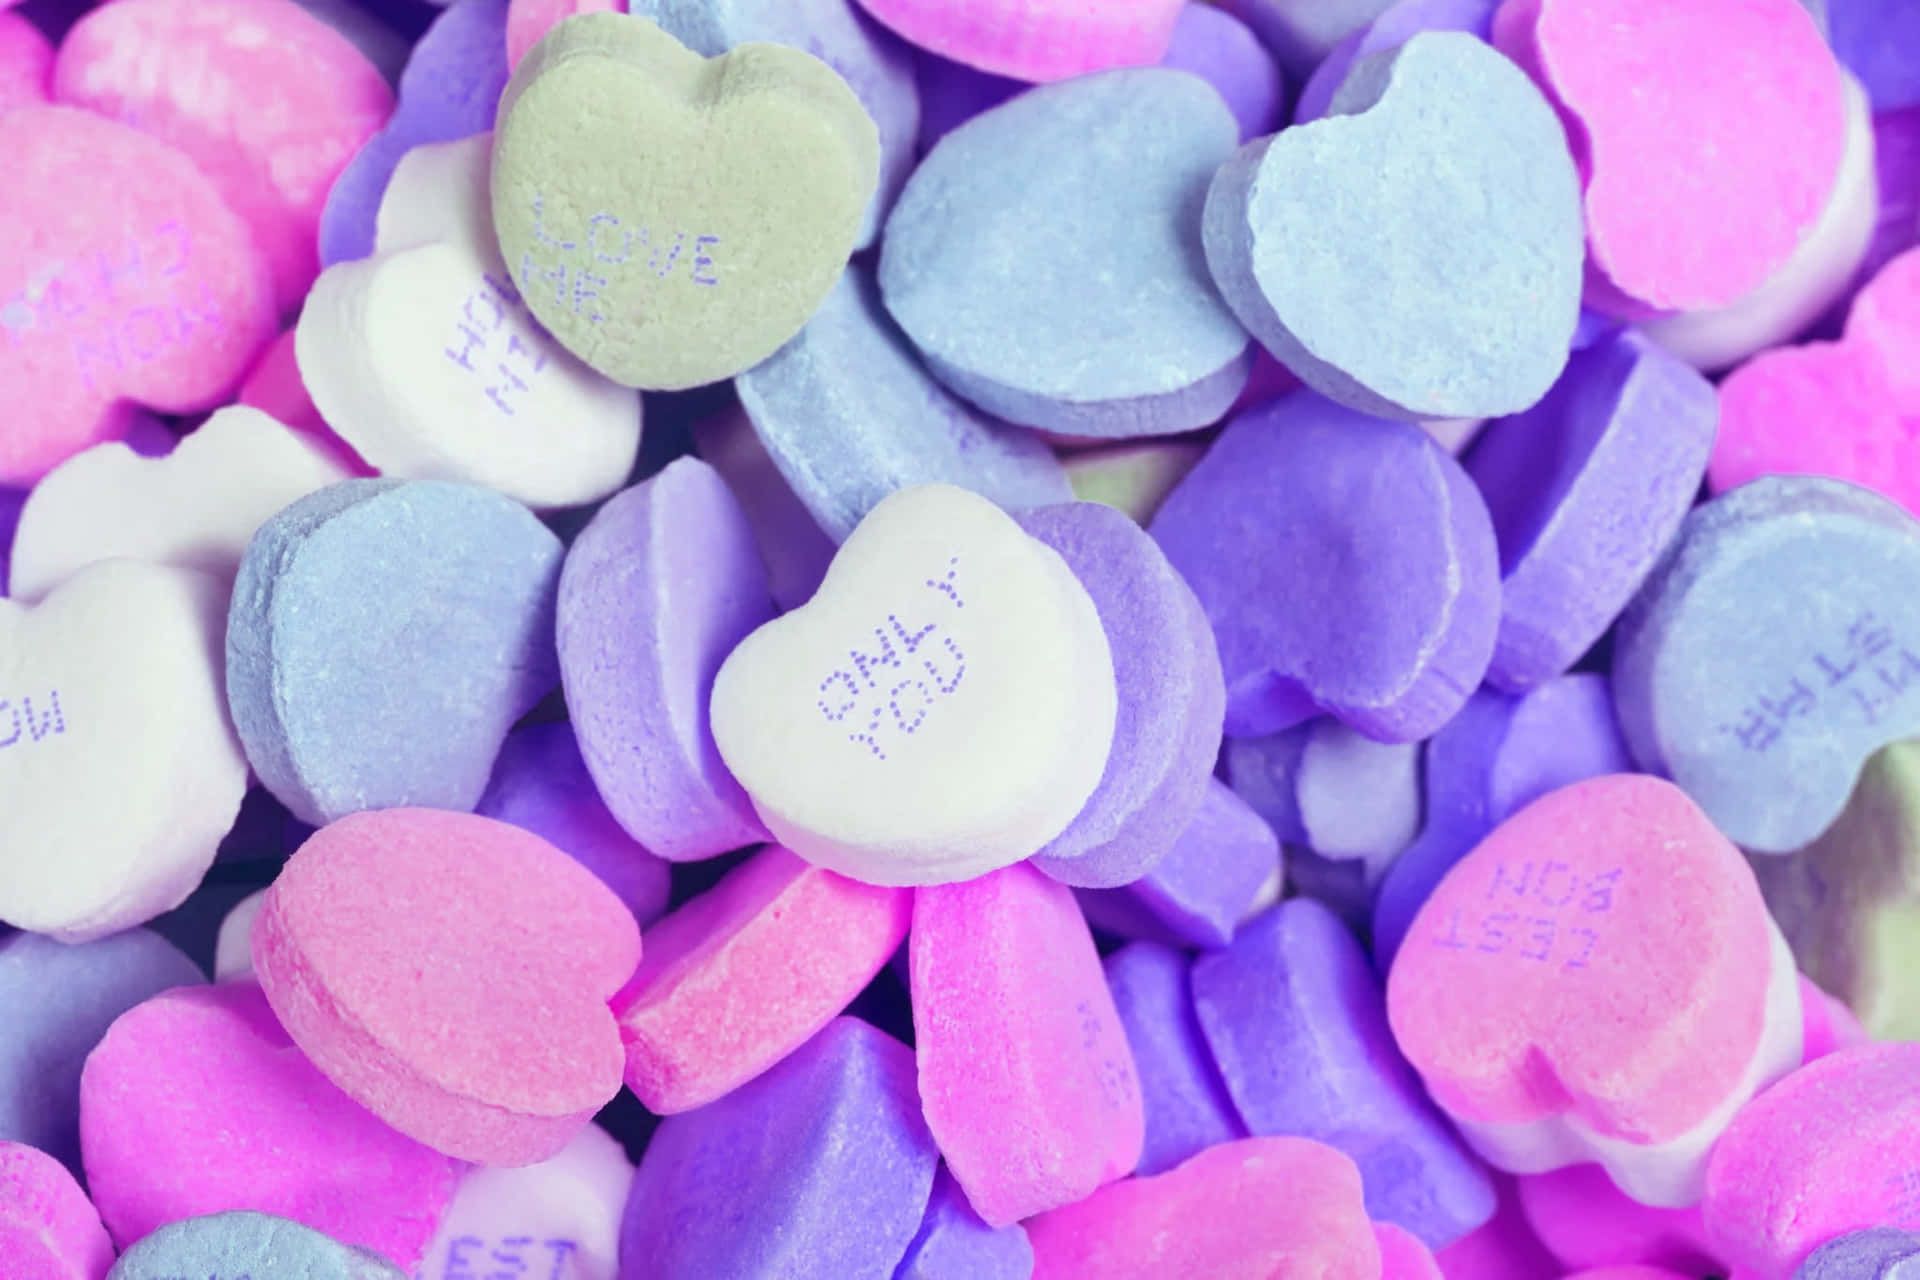 Download Romantic Heart Shape Sweet Candy Aesthetic Valentine's Day Wallpaper